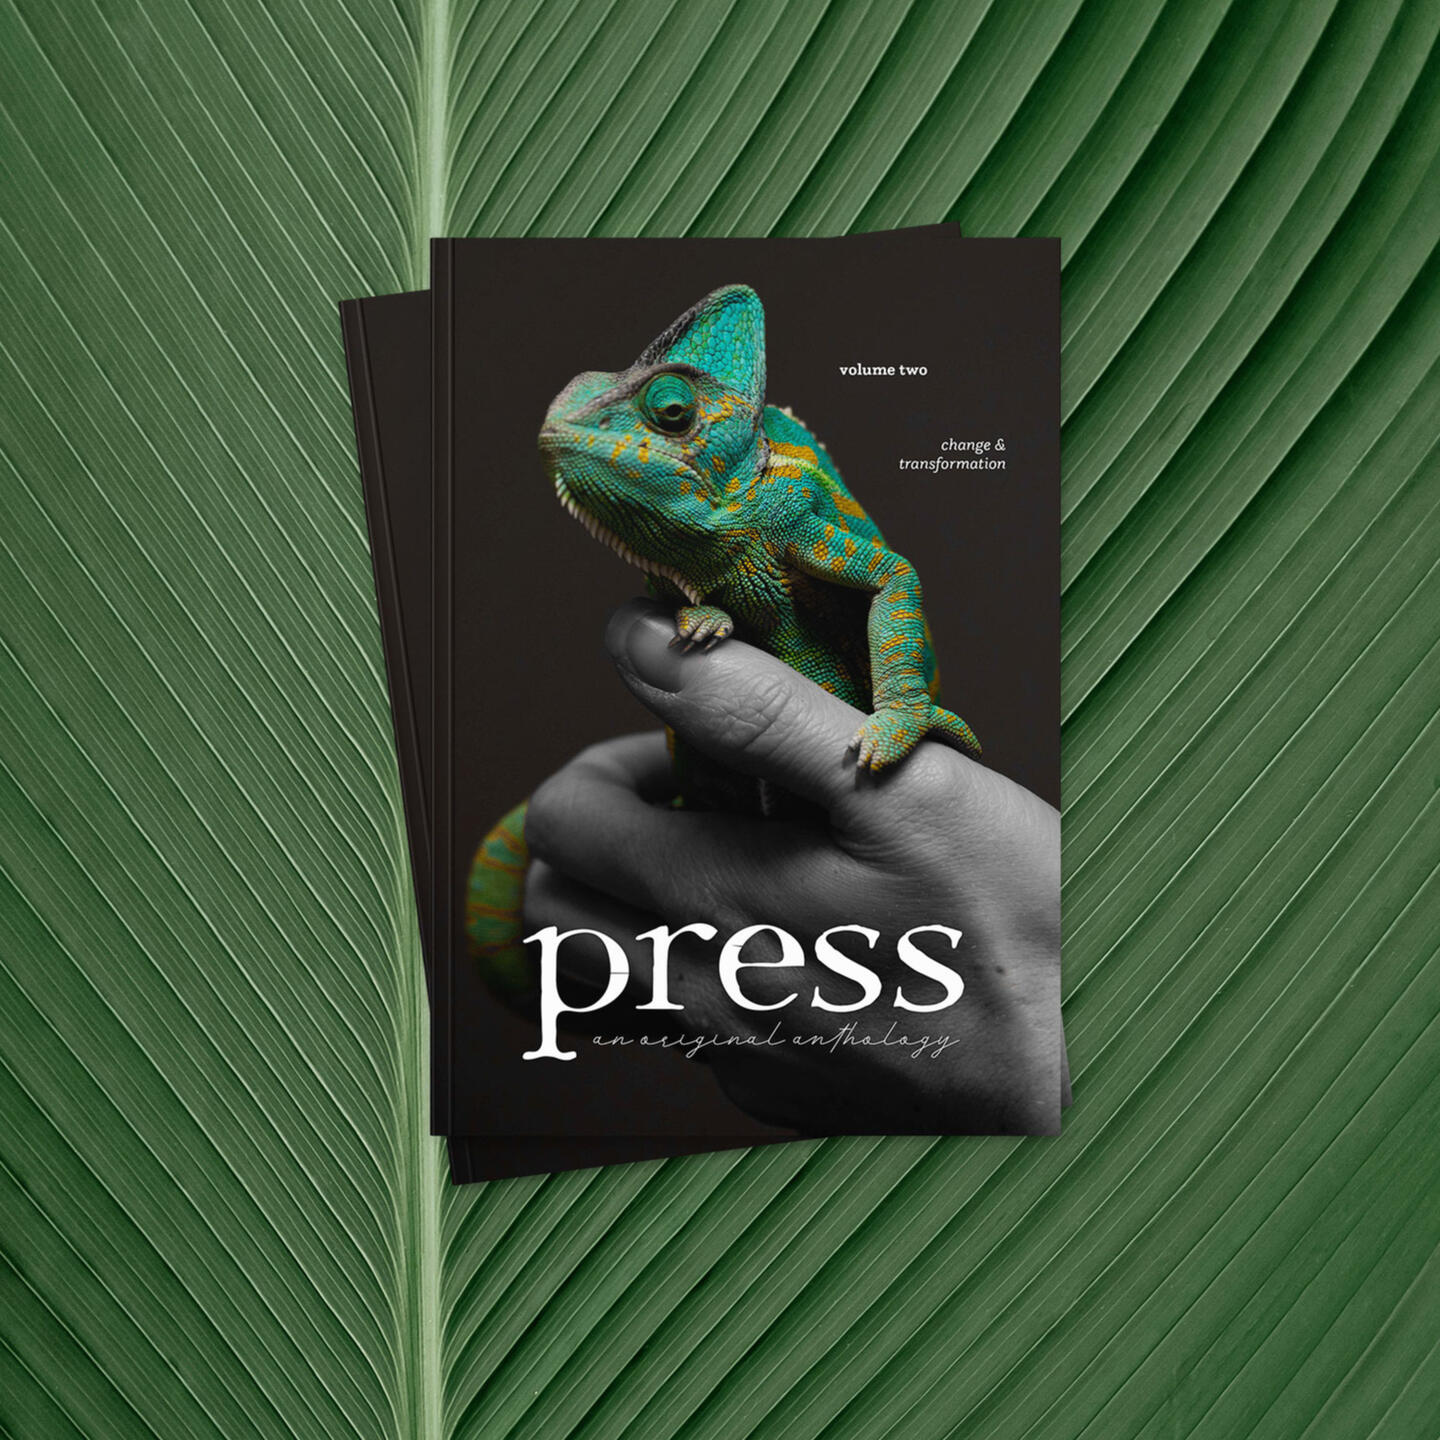 press volume two cover: a chameleon perching on someone's hand